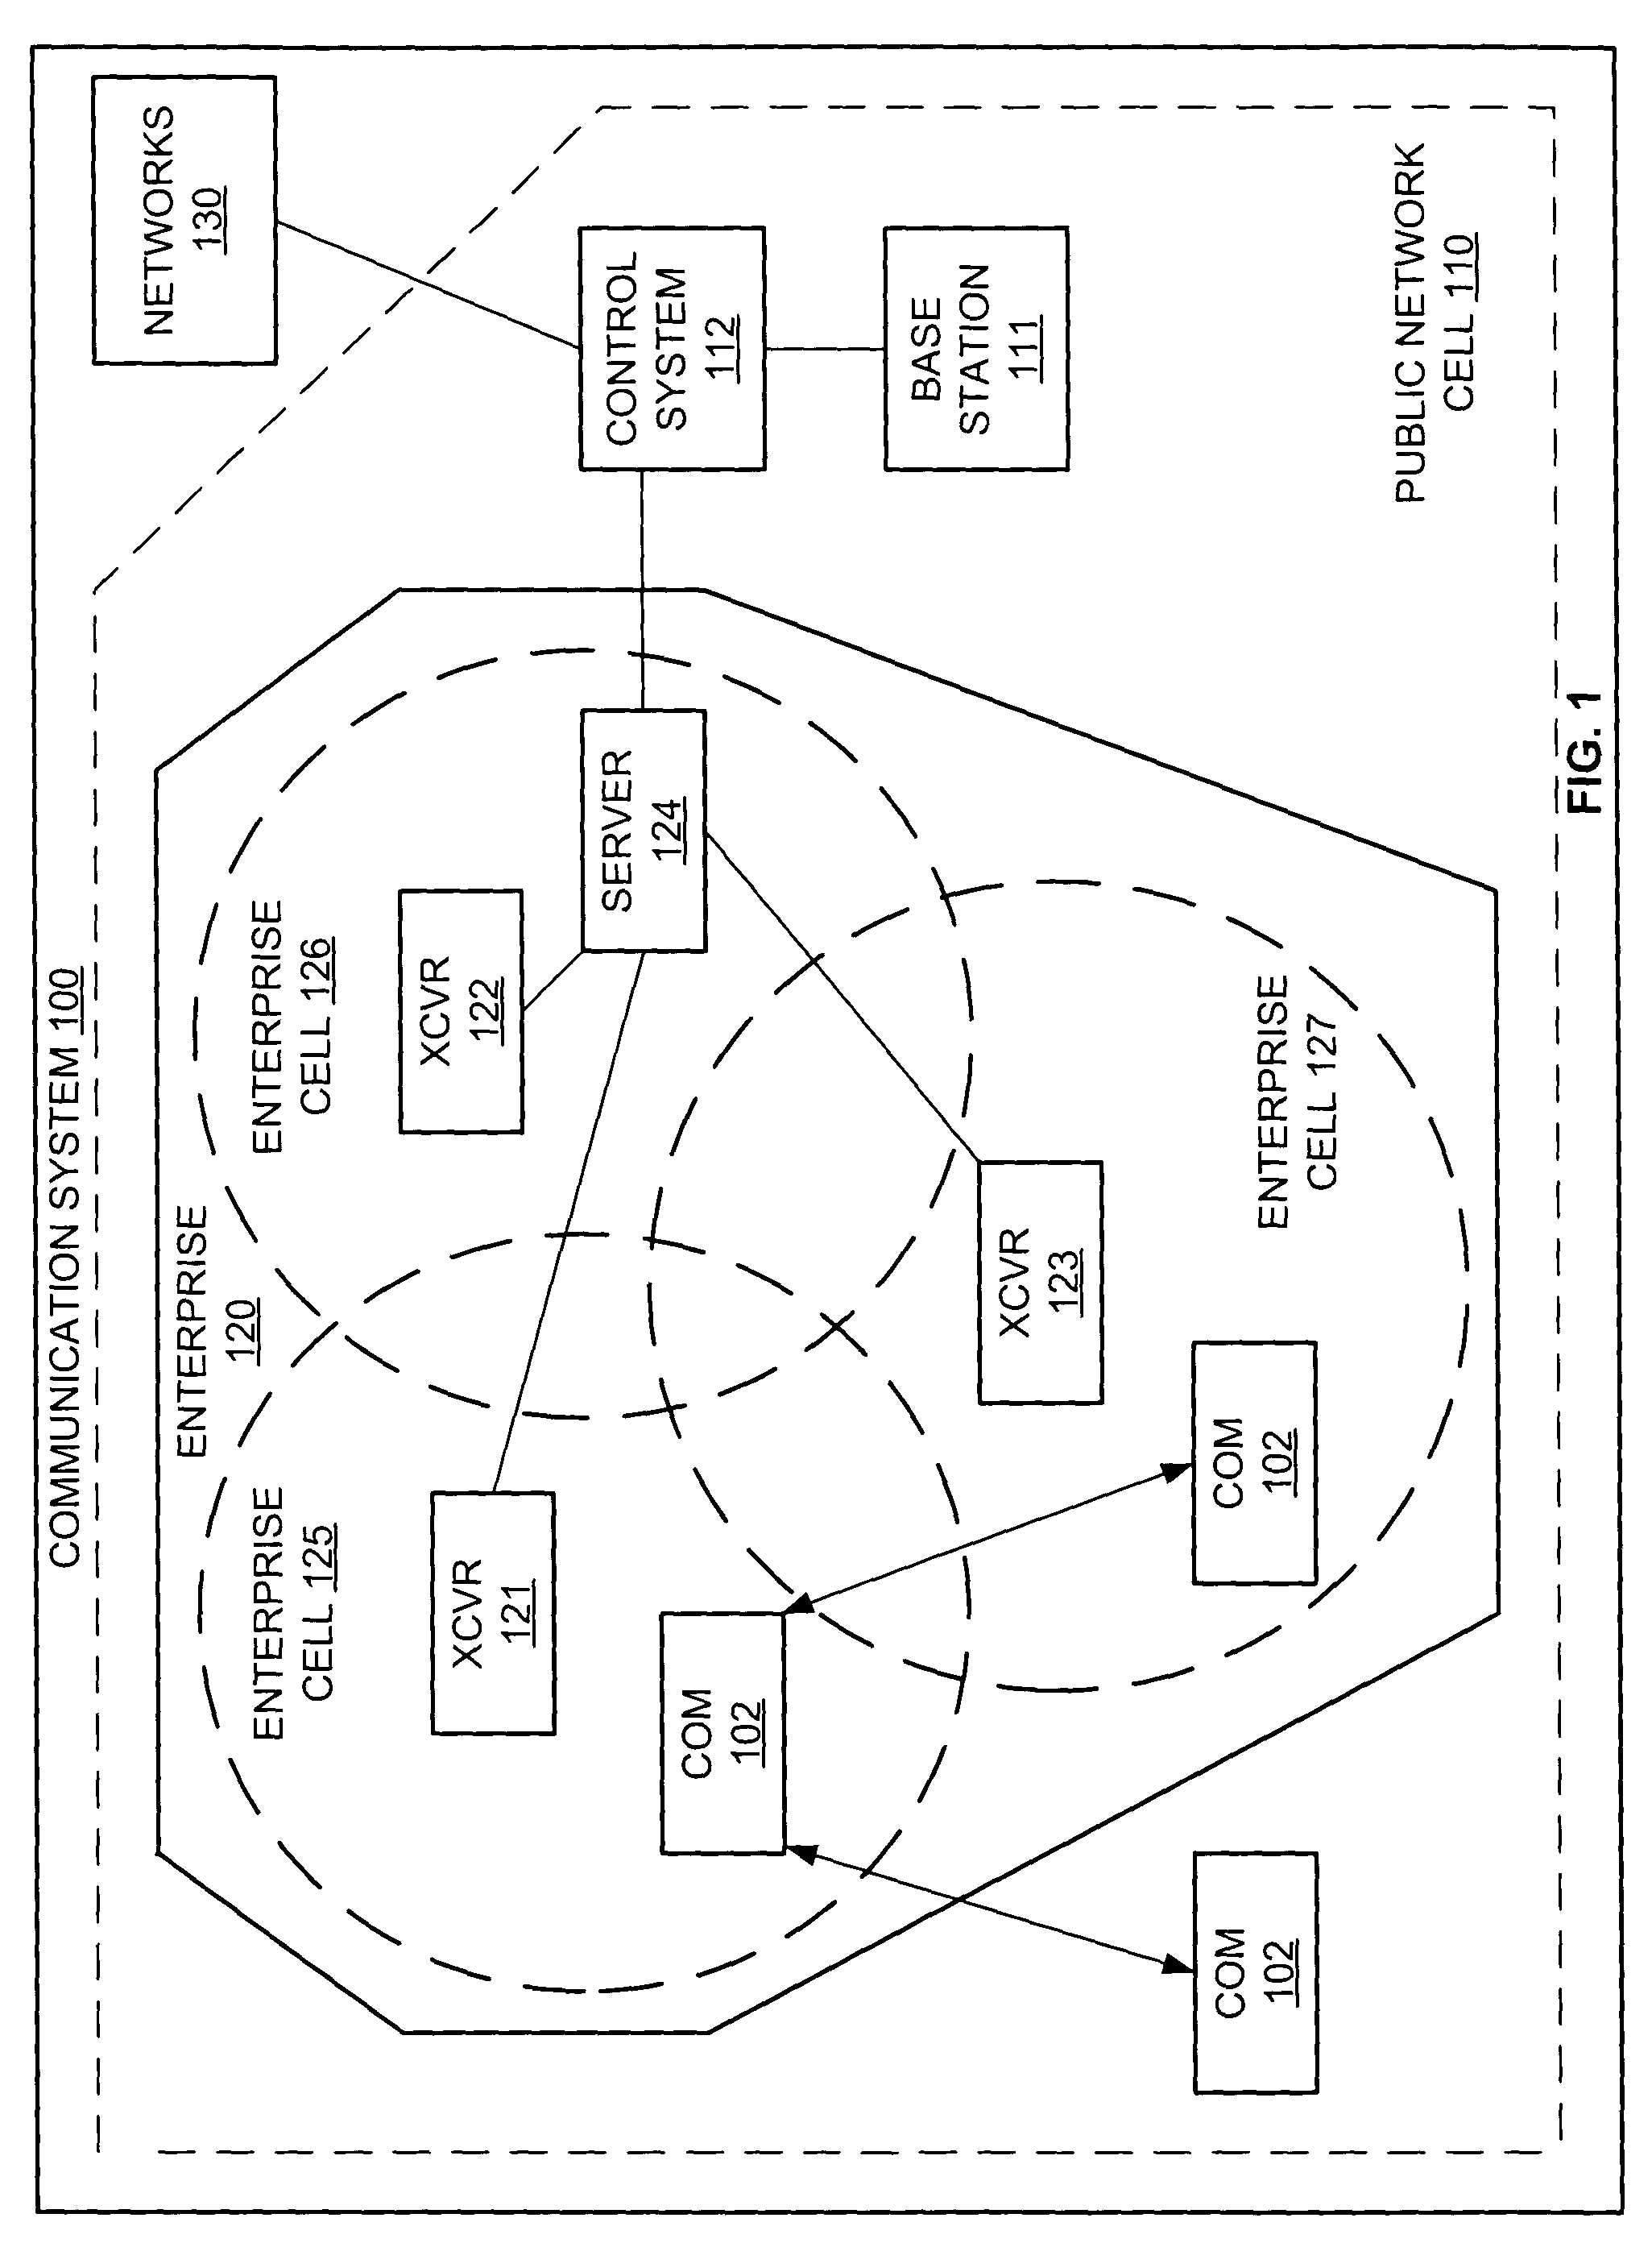 Validating a transaction with user voice authentication using wireless communications